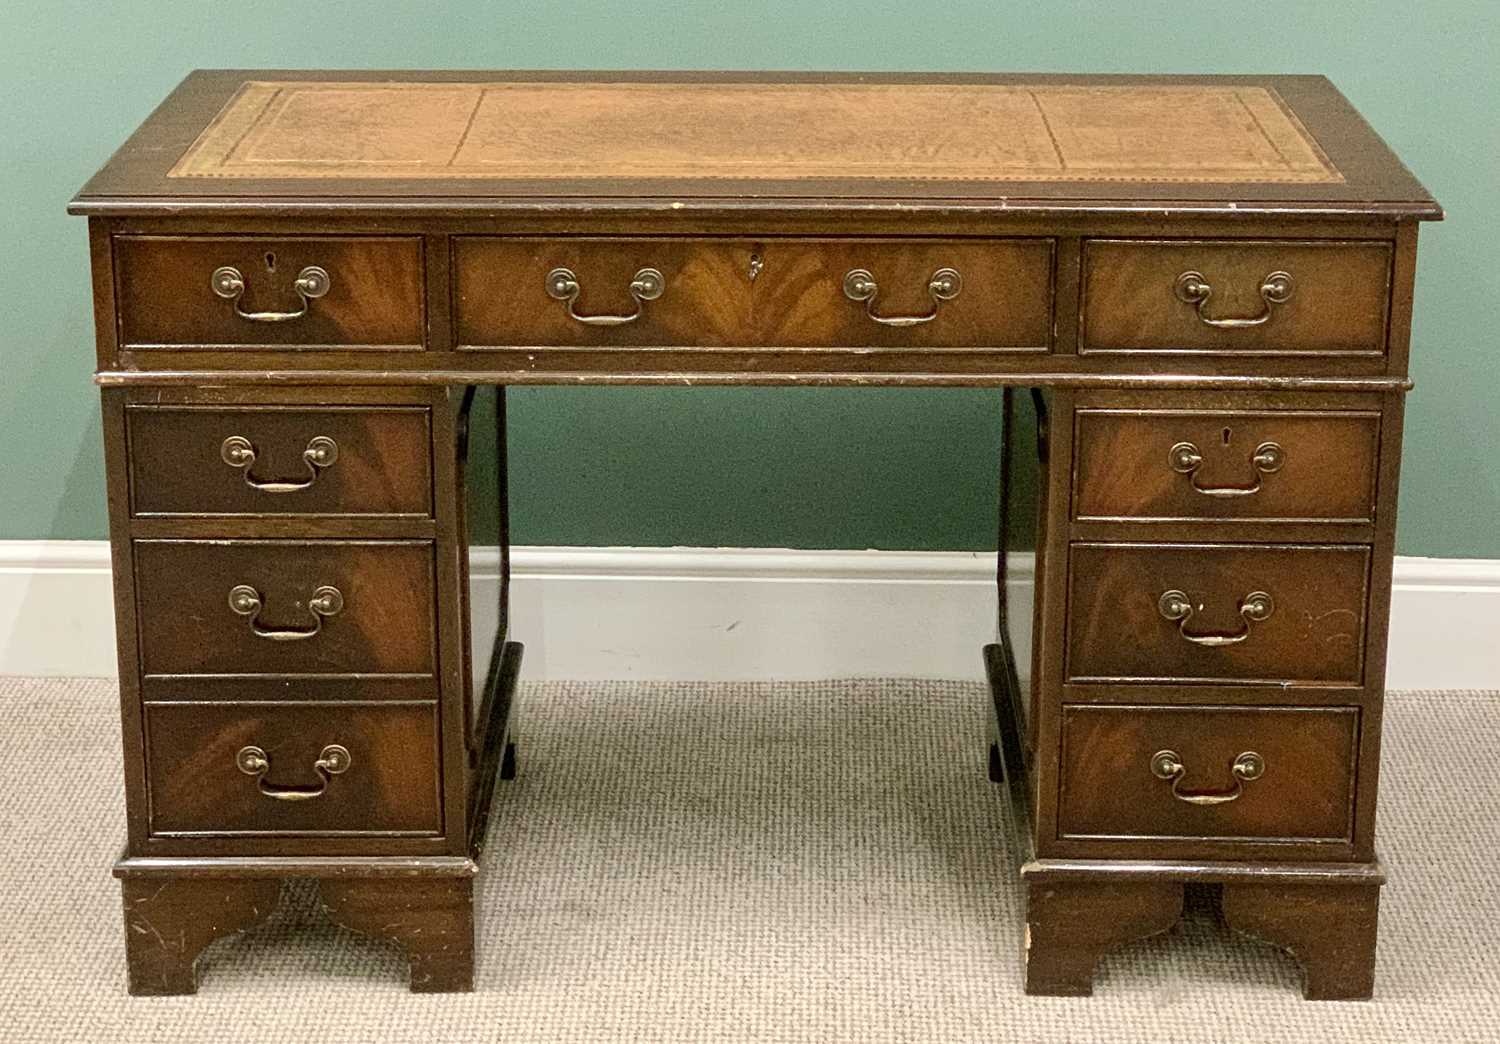 REPRODUCTION MAHOGANY TWIN PEDESTAL DESK - having eight opening drawers with swan neck handles, on